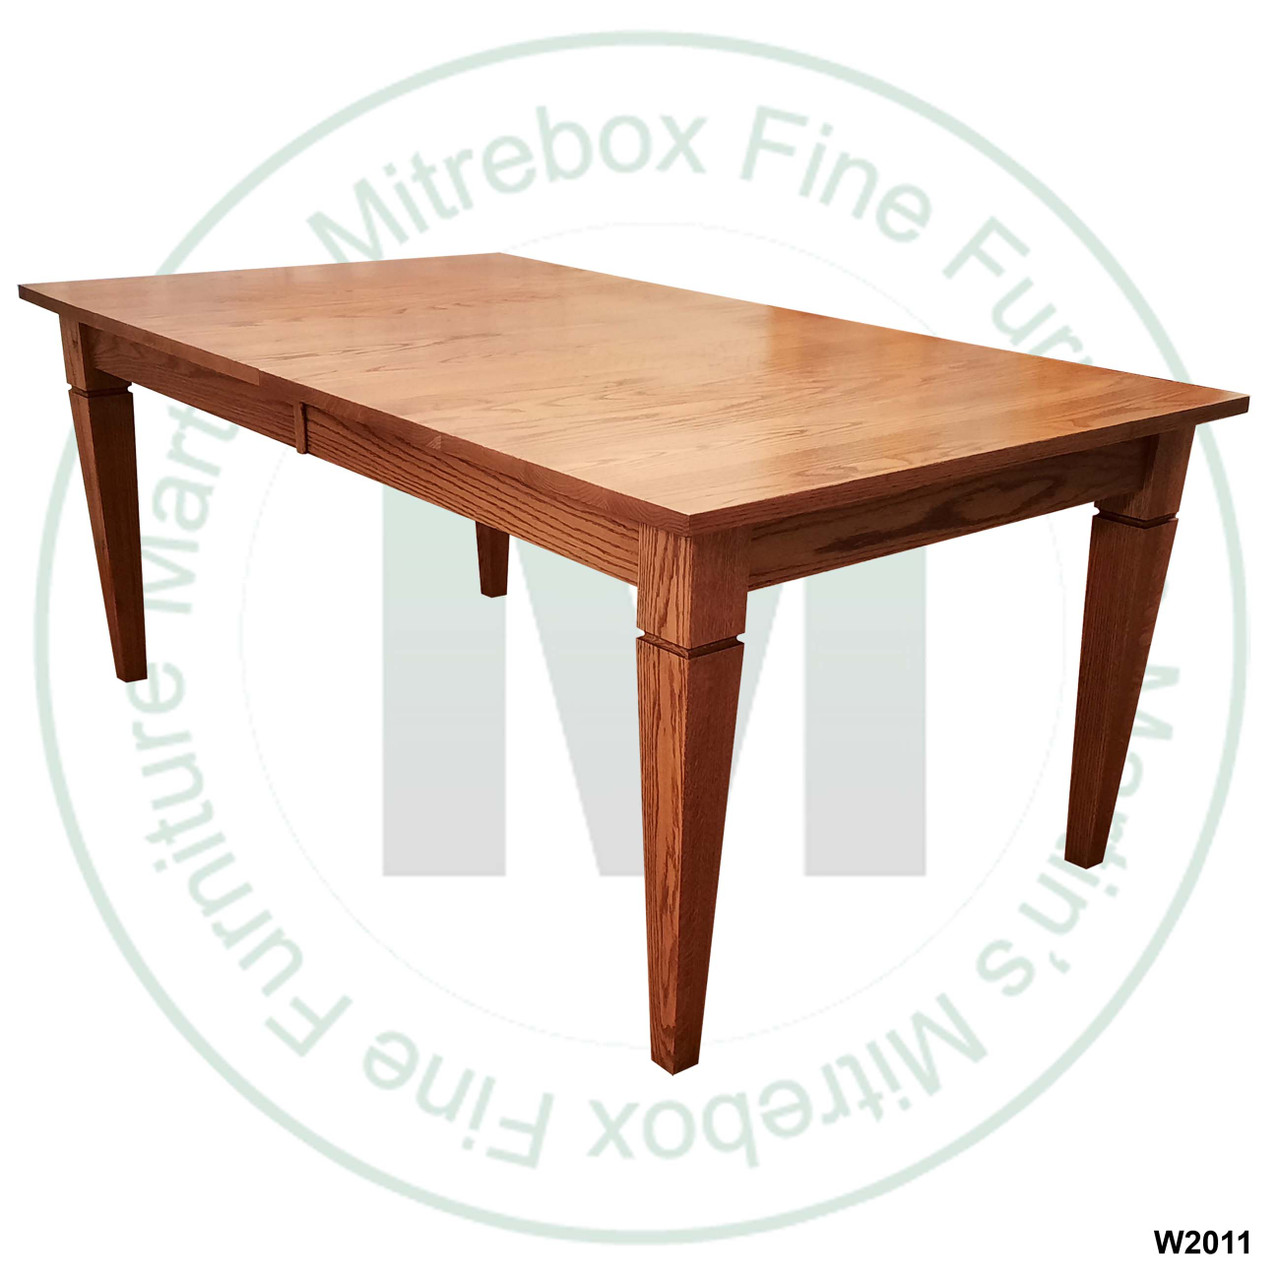 Oak Reesor Solid Top Harvest Table 42''D x 72''W x 30''H Table Has 1 3/4'' Thick Top